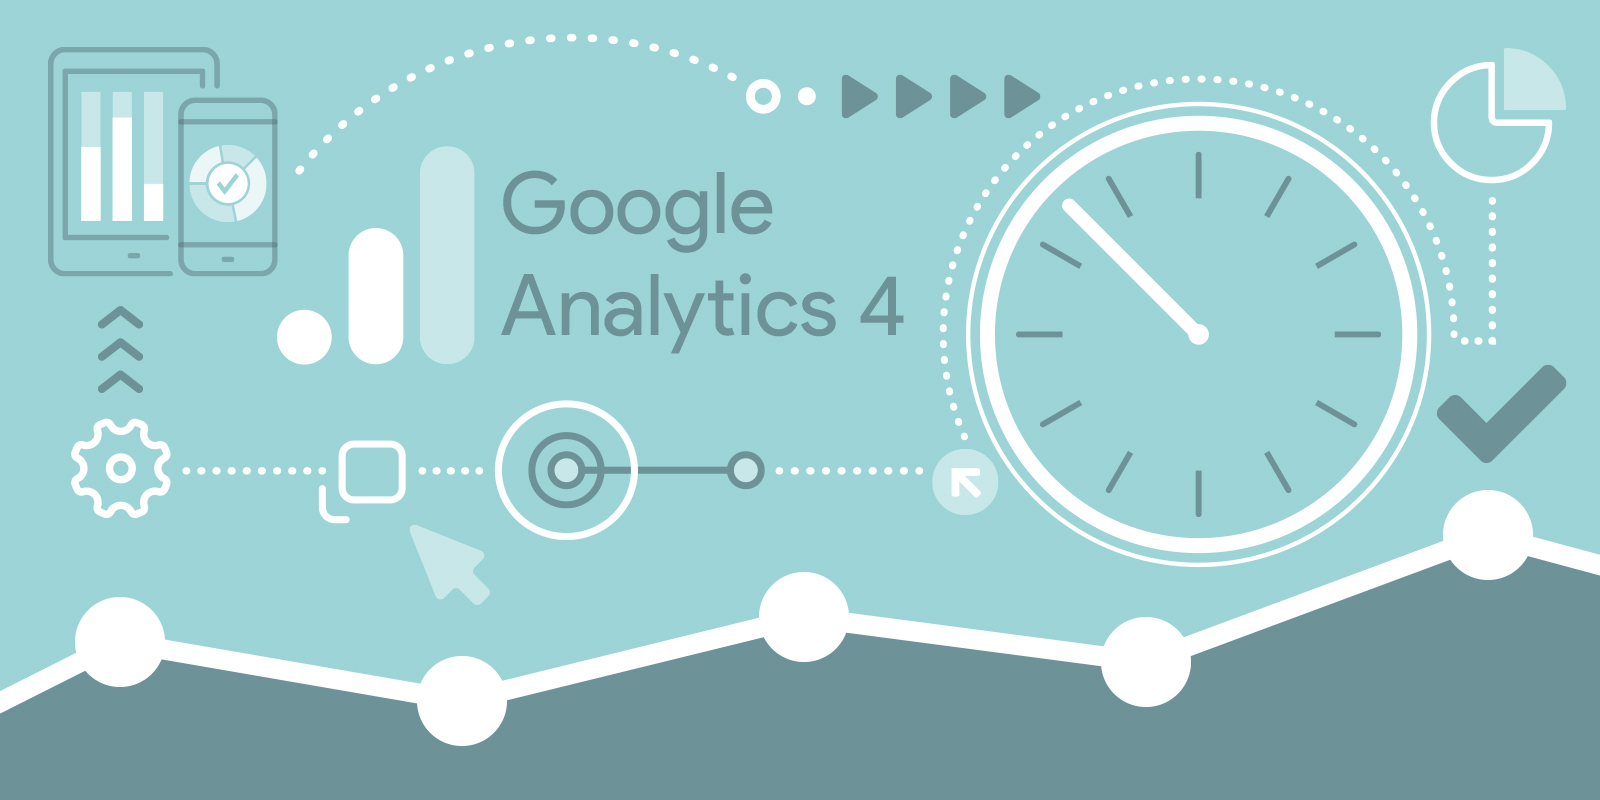 Google Analytics 4: What does it mean?